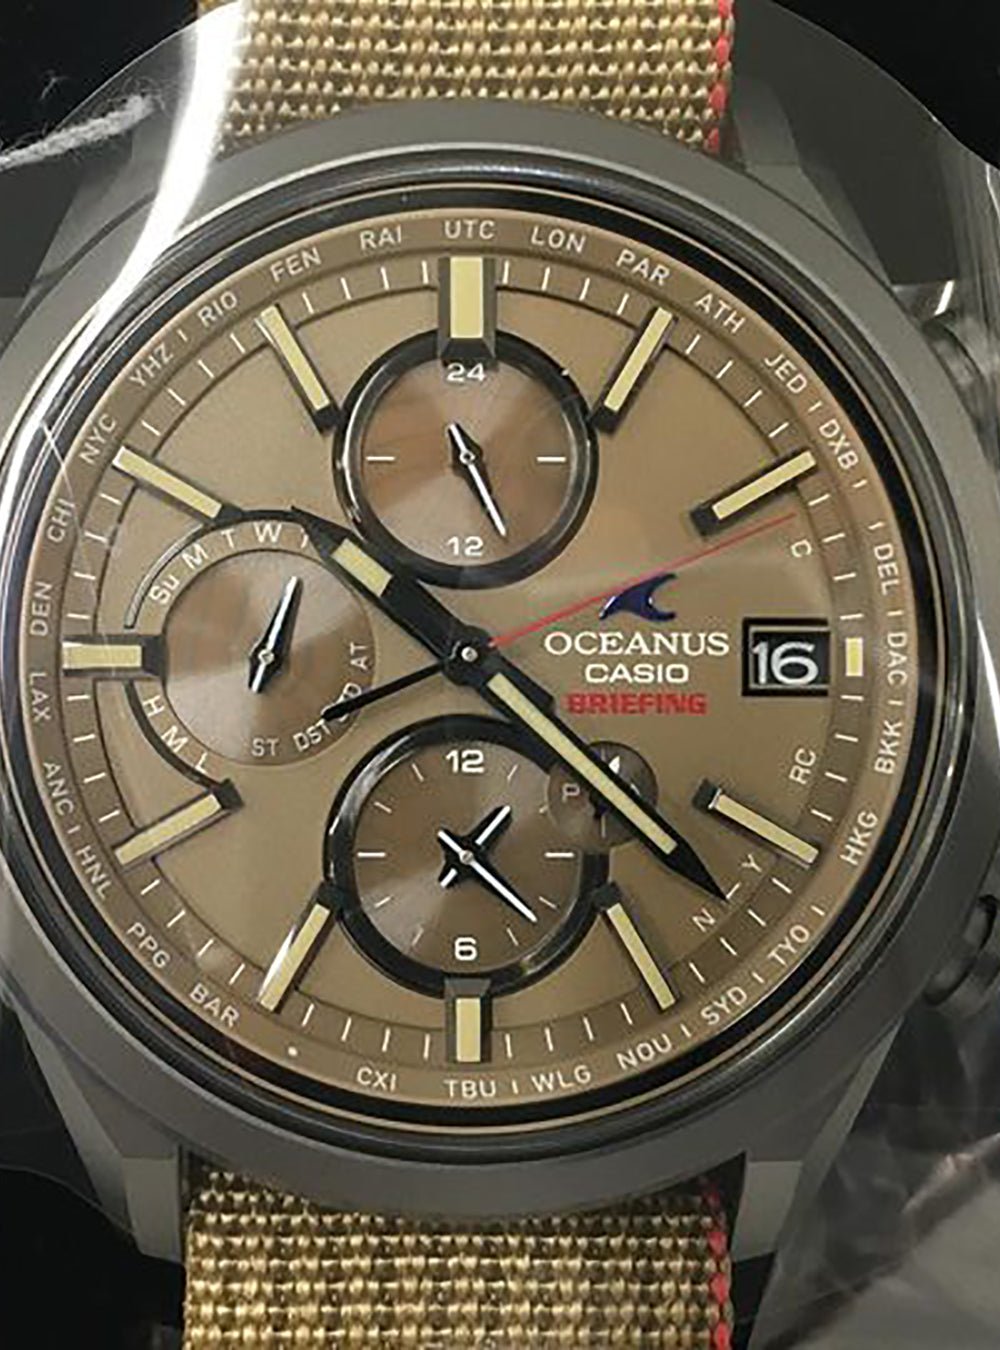 CASIO OCEANUS CLASSIC LINE BRIEFING COLLABORATION MODEL OCW-T4000BRE-5AJR  MADE IN JAPAN JDM